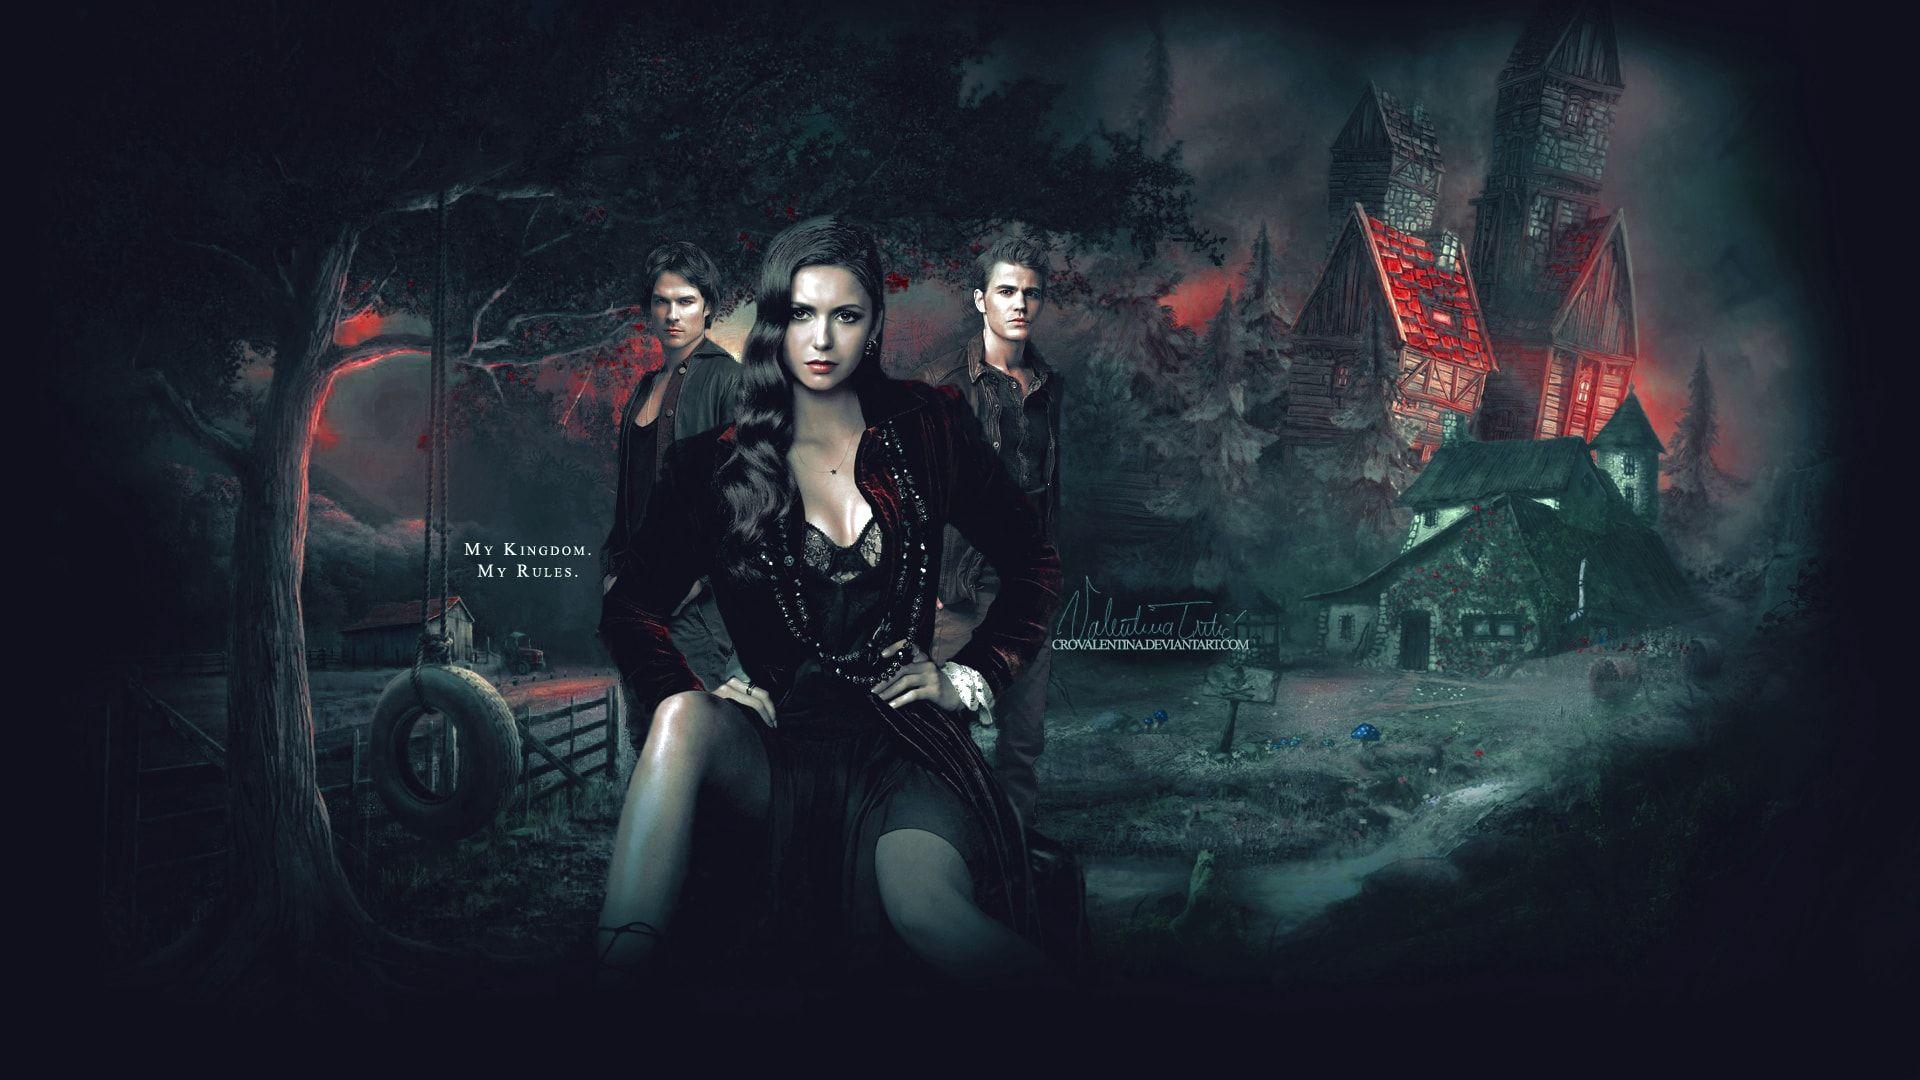 Download Vampire wallpapers for mobile phone free Vampire HD pictures